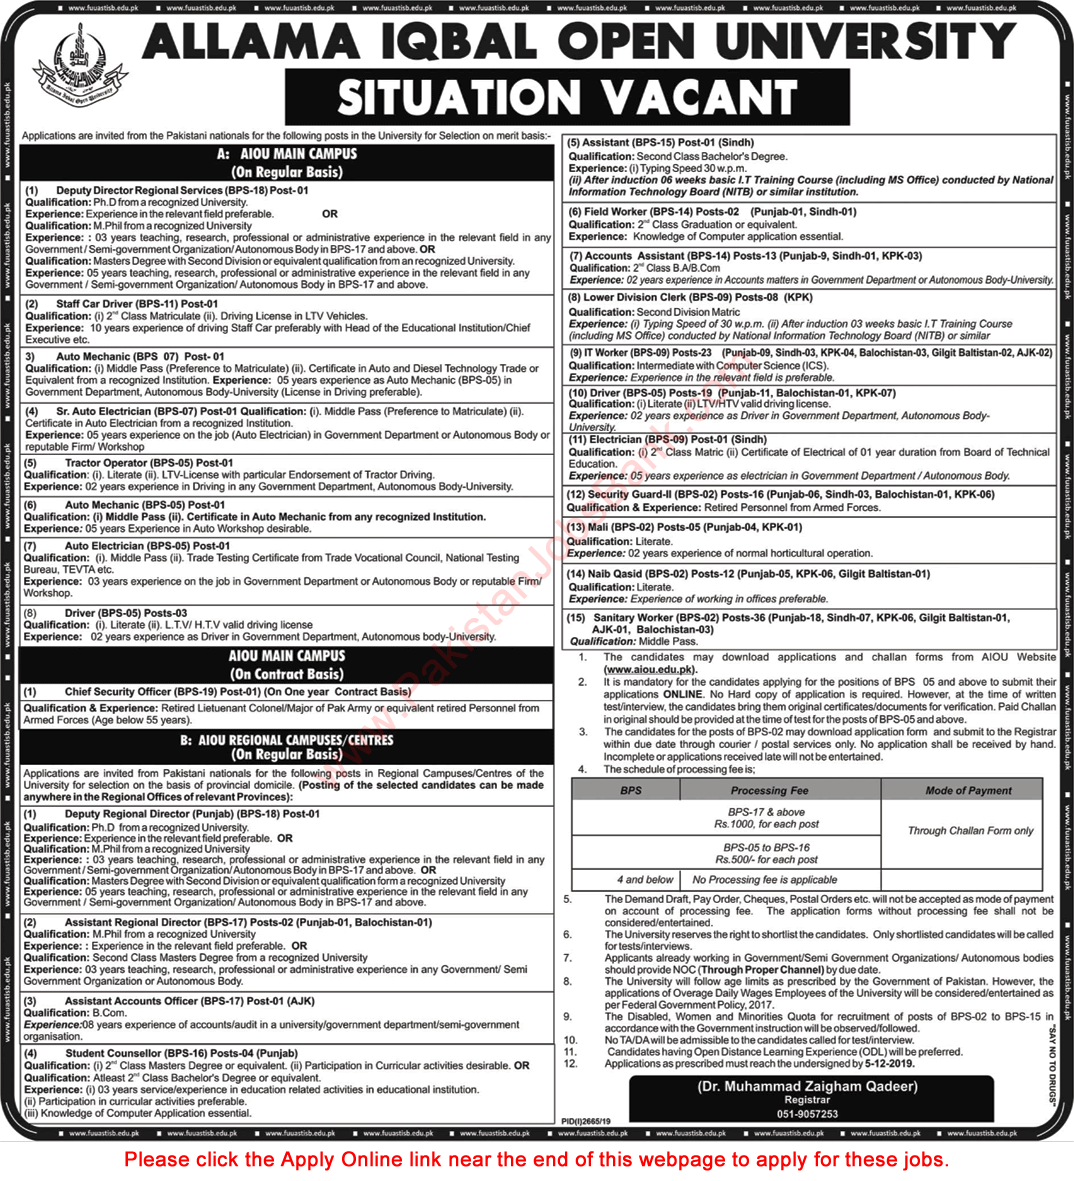 AIOU Jobs November 2019 Apply Online IT Workers, Clerks, Drivers & Others Latest